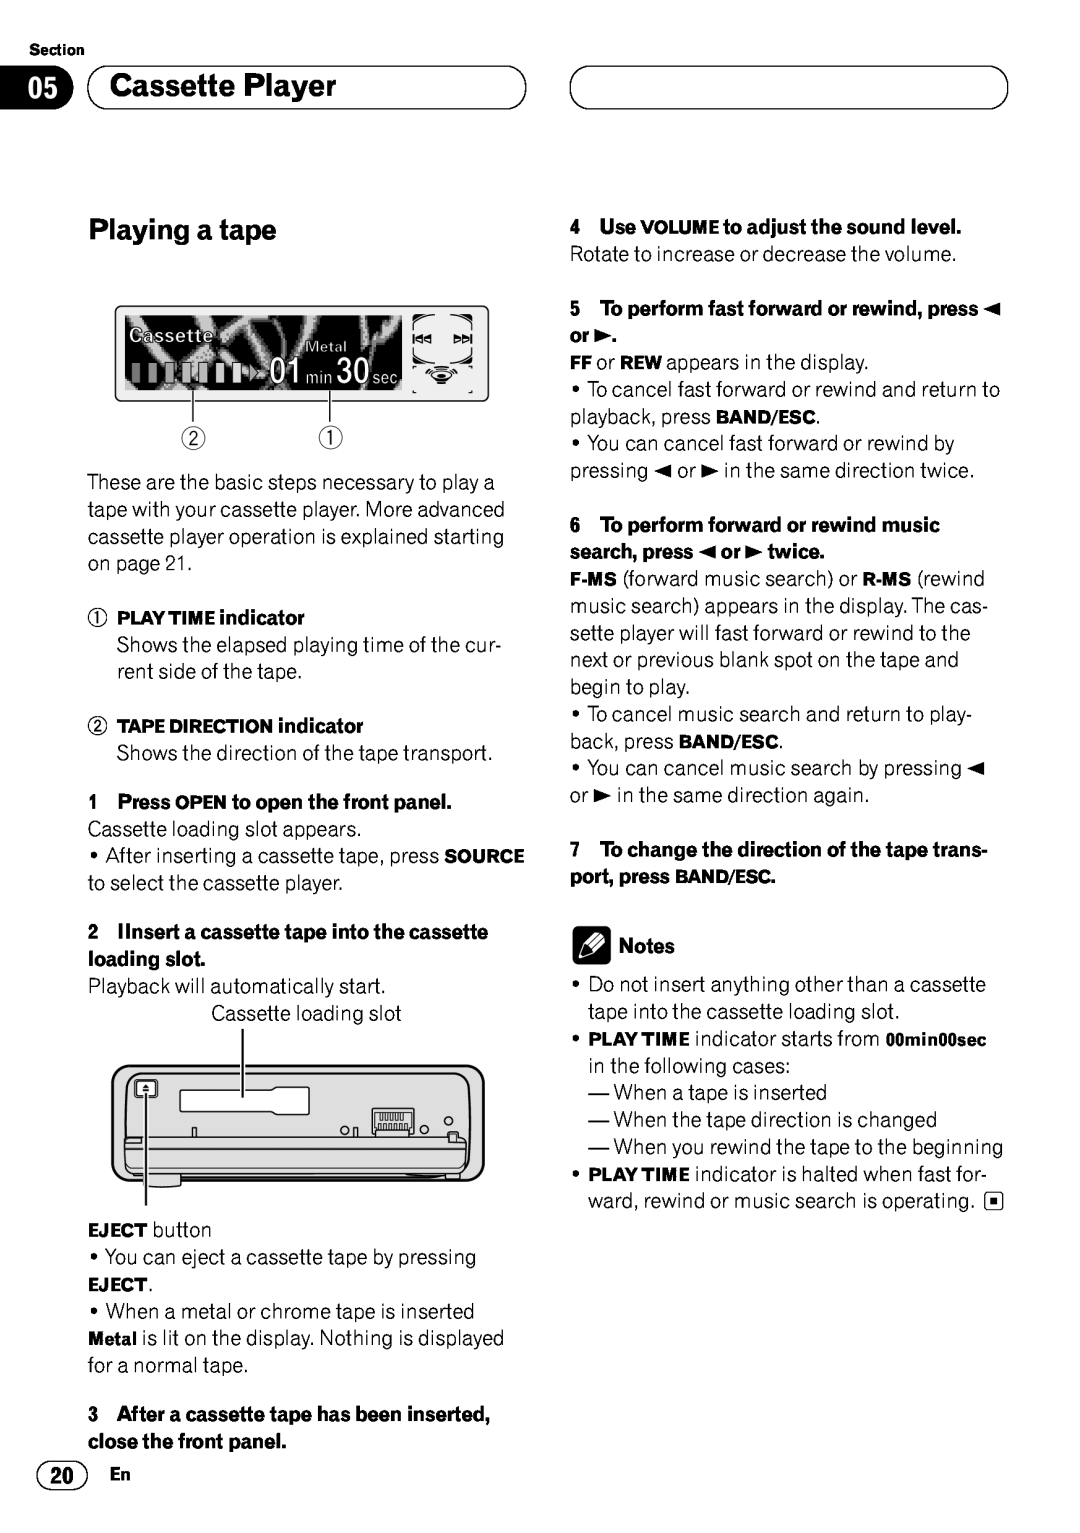 Pioneer KEH-P7020R operation manual 05Cassette Player, Playing a tape, 5To perform fast forward or rewind, press 2 or 